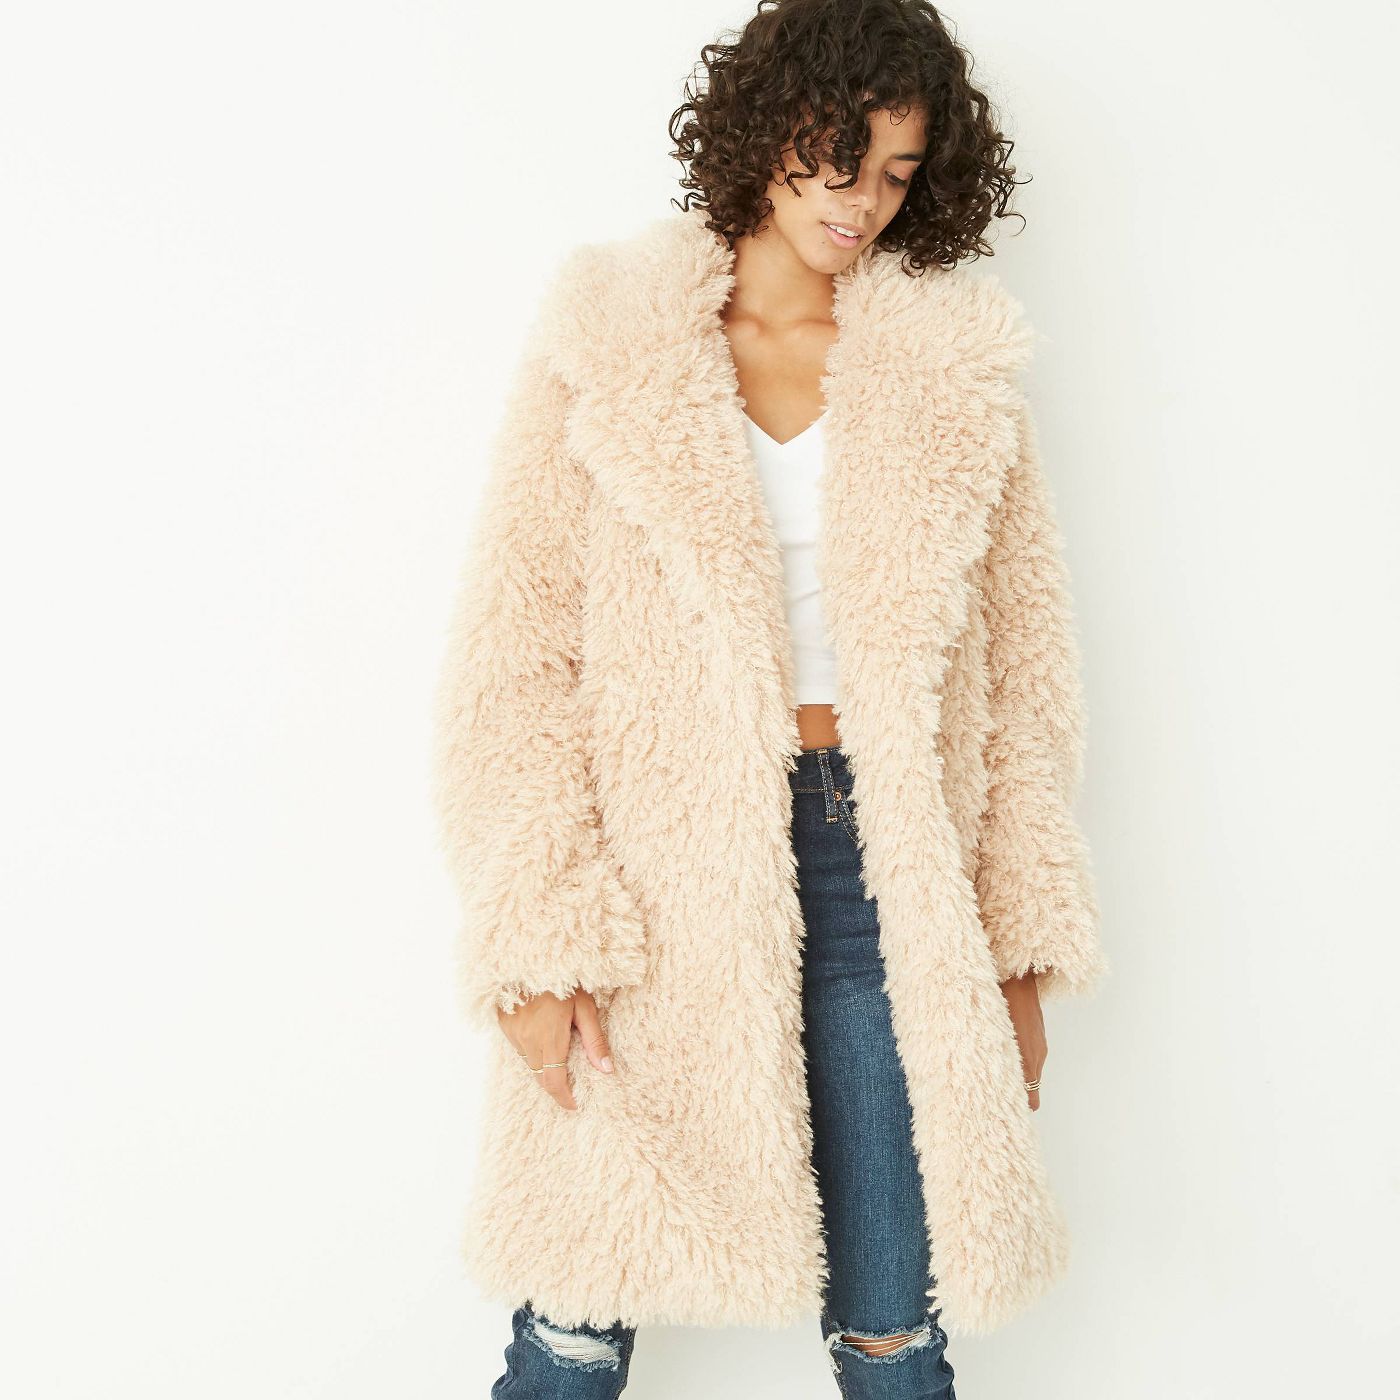 The Wild Fable Faux Fur Trim Long Jacket Is Going Viral on TikTok